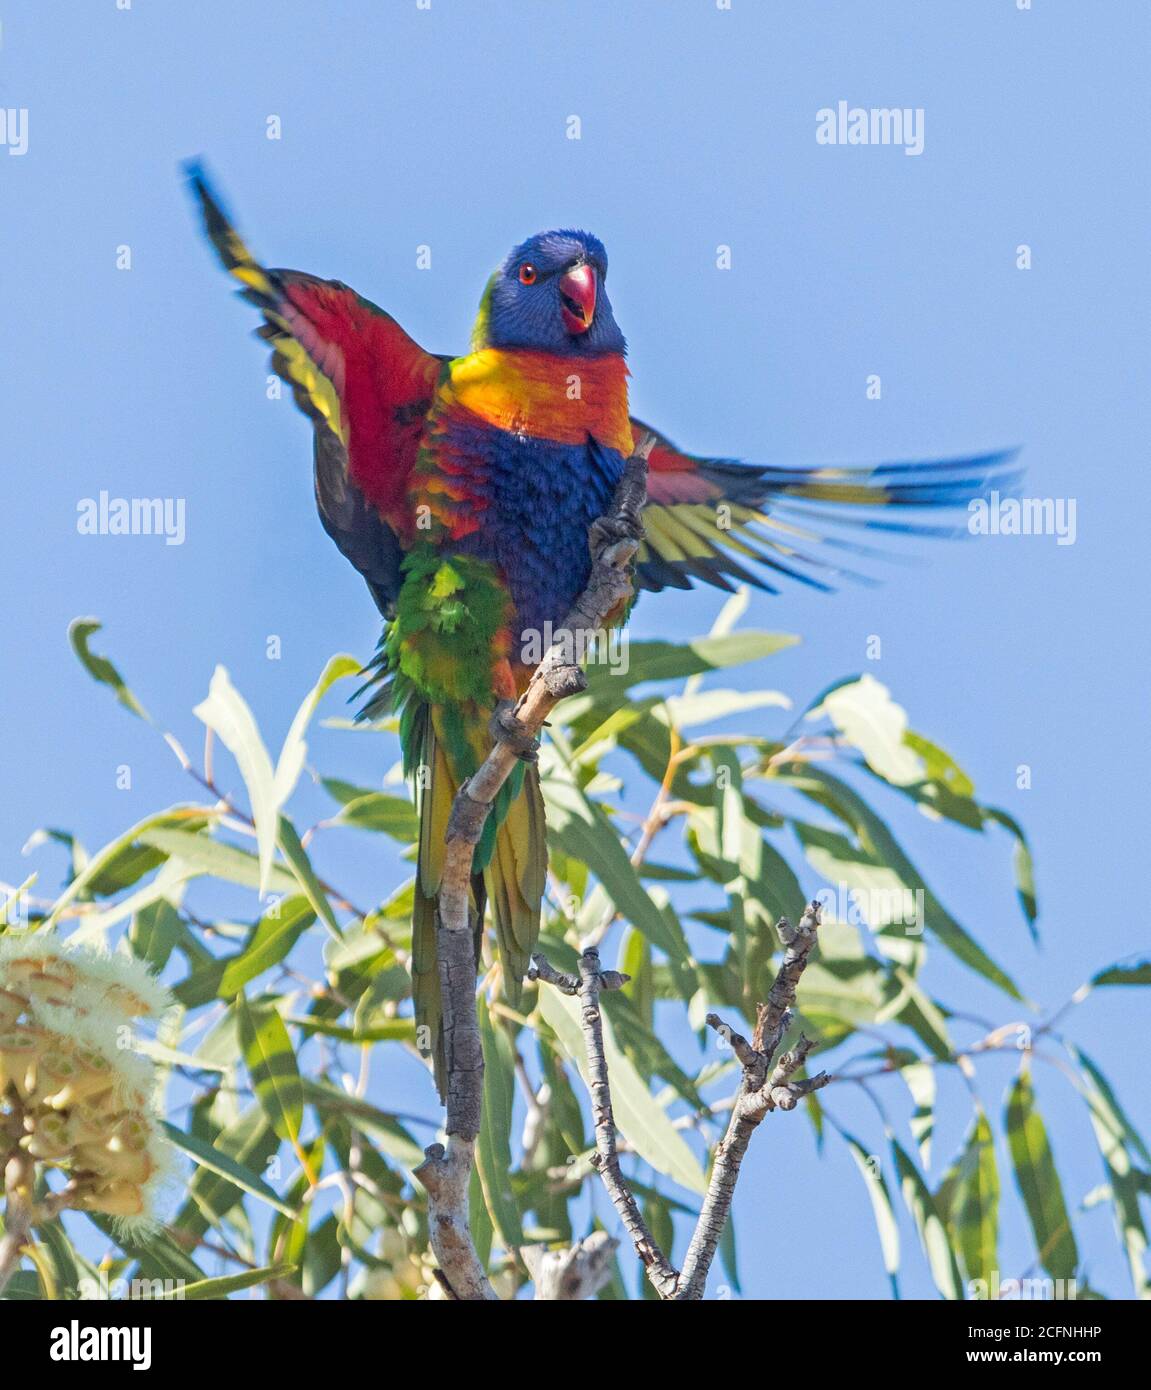 Spectacular view of Australian Rainbow Lorikeet, Trichoglossus moluccanus on top of gum tree with colourful wings outstretched against blue sky Stock Photo